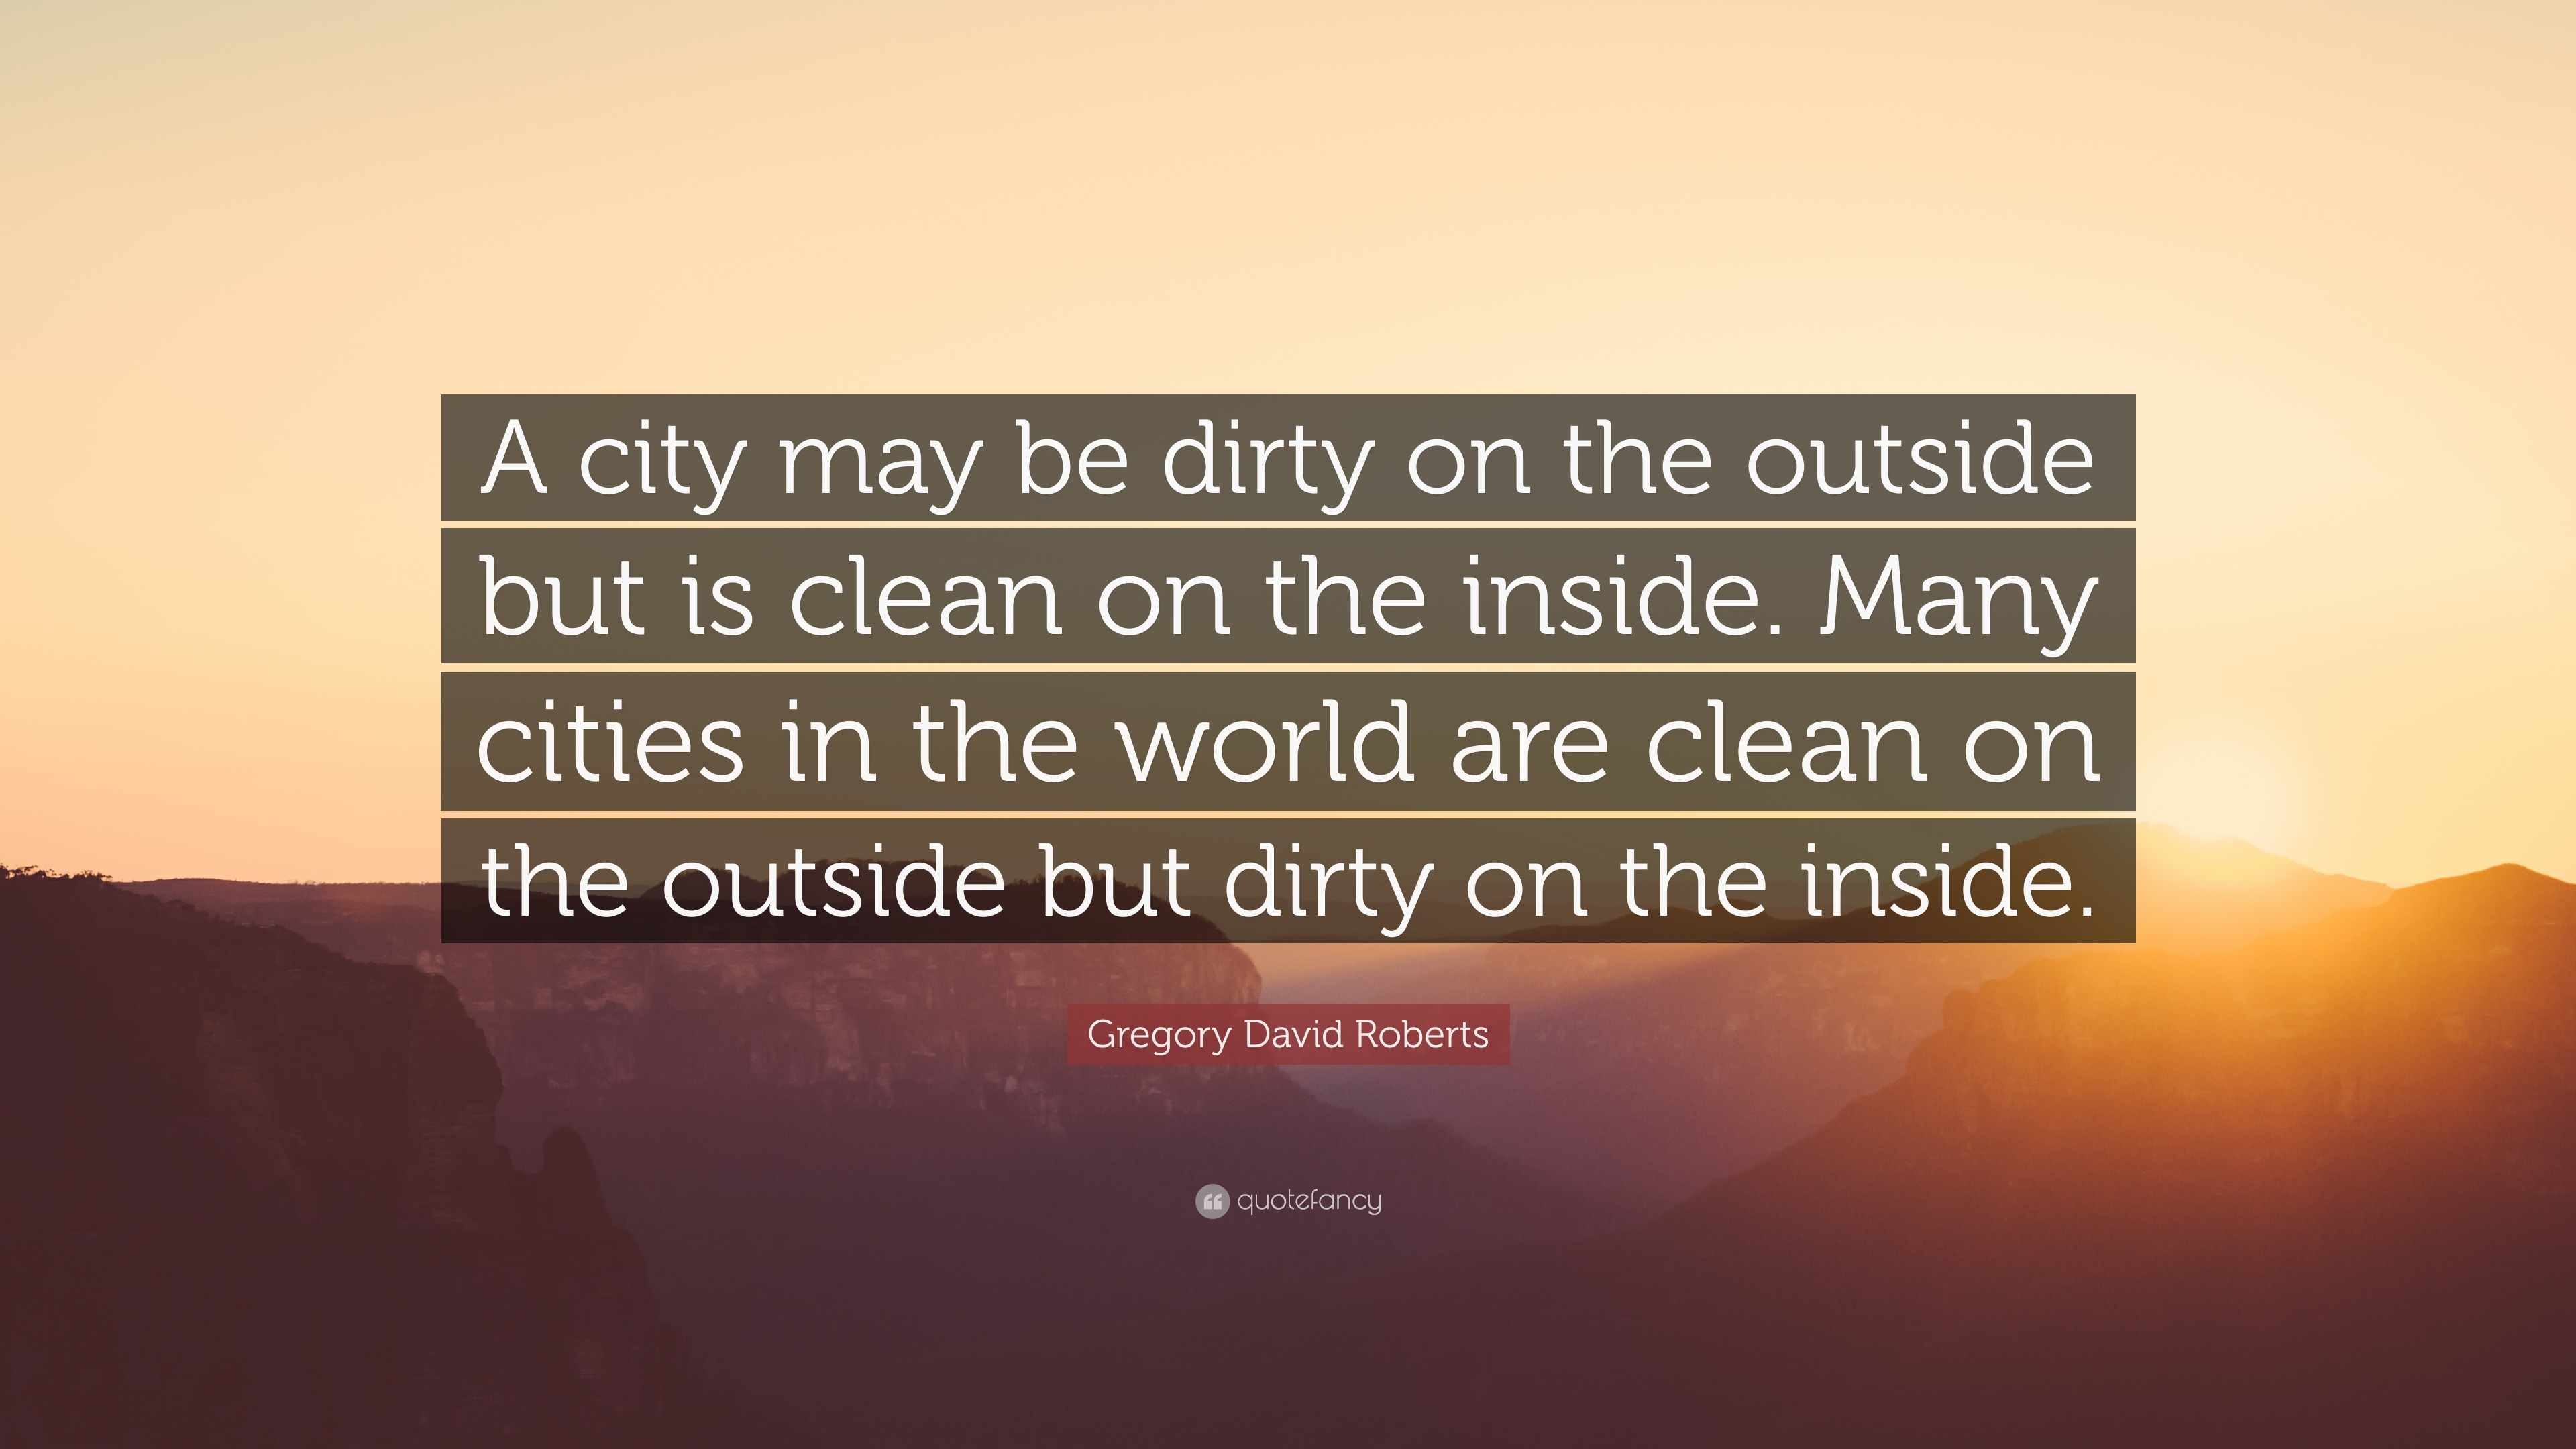 Gregory David Roberts Quote: “A city may be dirty on the outside but is ...